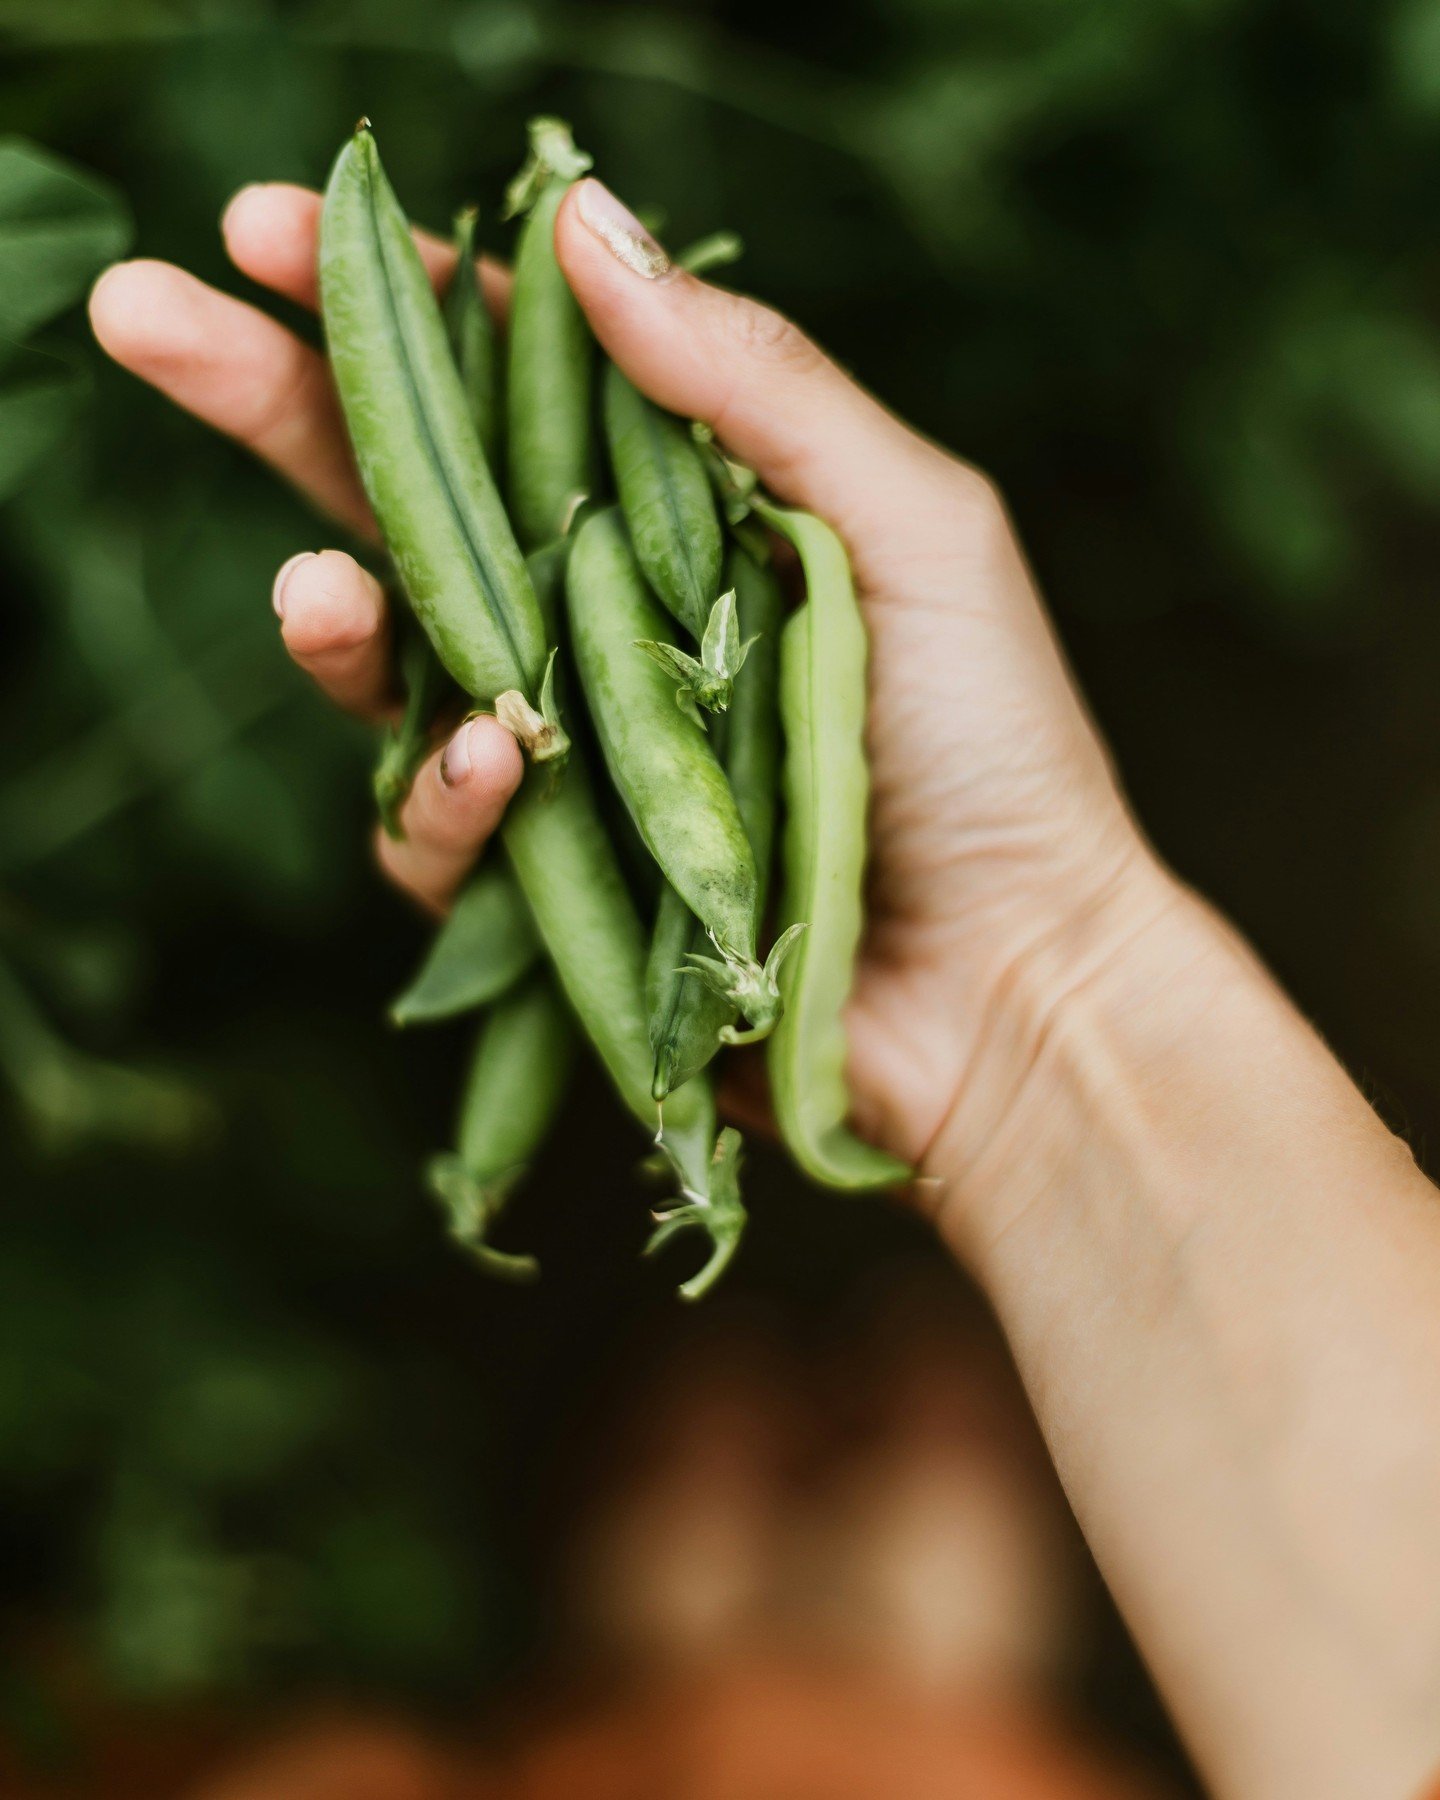 The humble pea. Whether they are Snap Peas, Snow Peas or Petit Pois, these little, typically green, gems are quite versatile. Most folks only think of peas as the vegetable you boil, steam or mush to eat with fish and chips, but within the beverage s